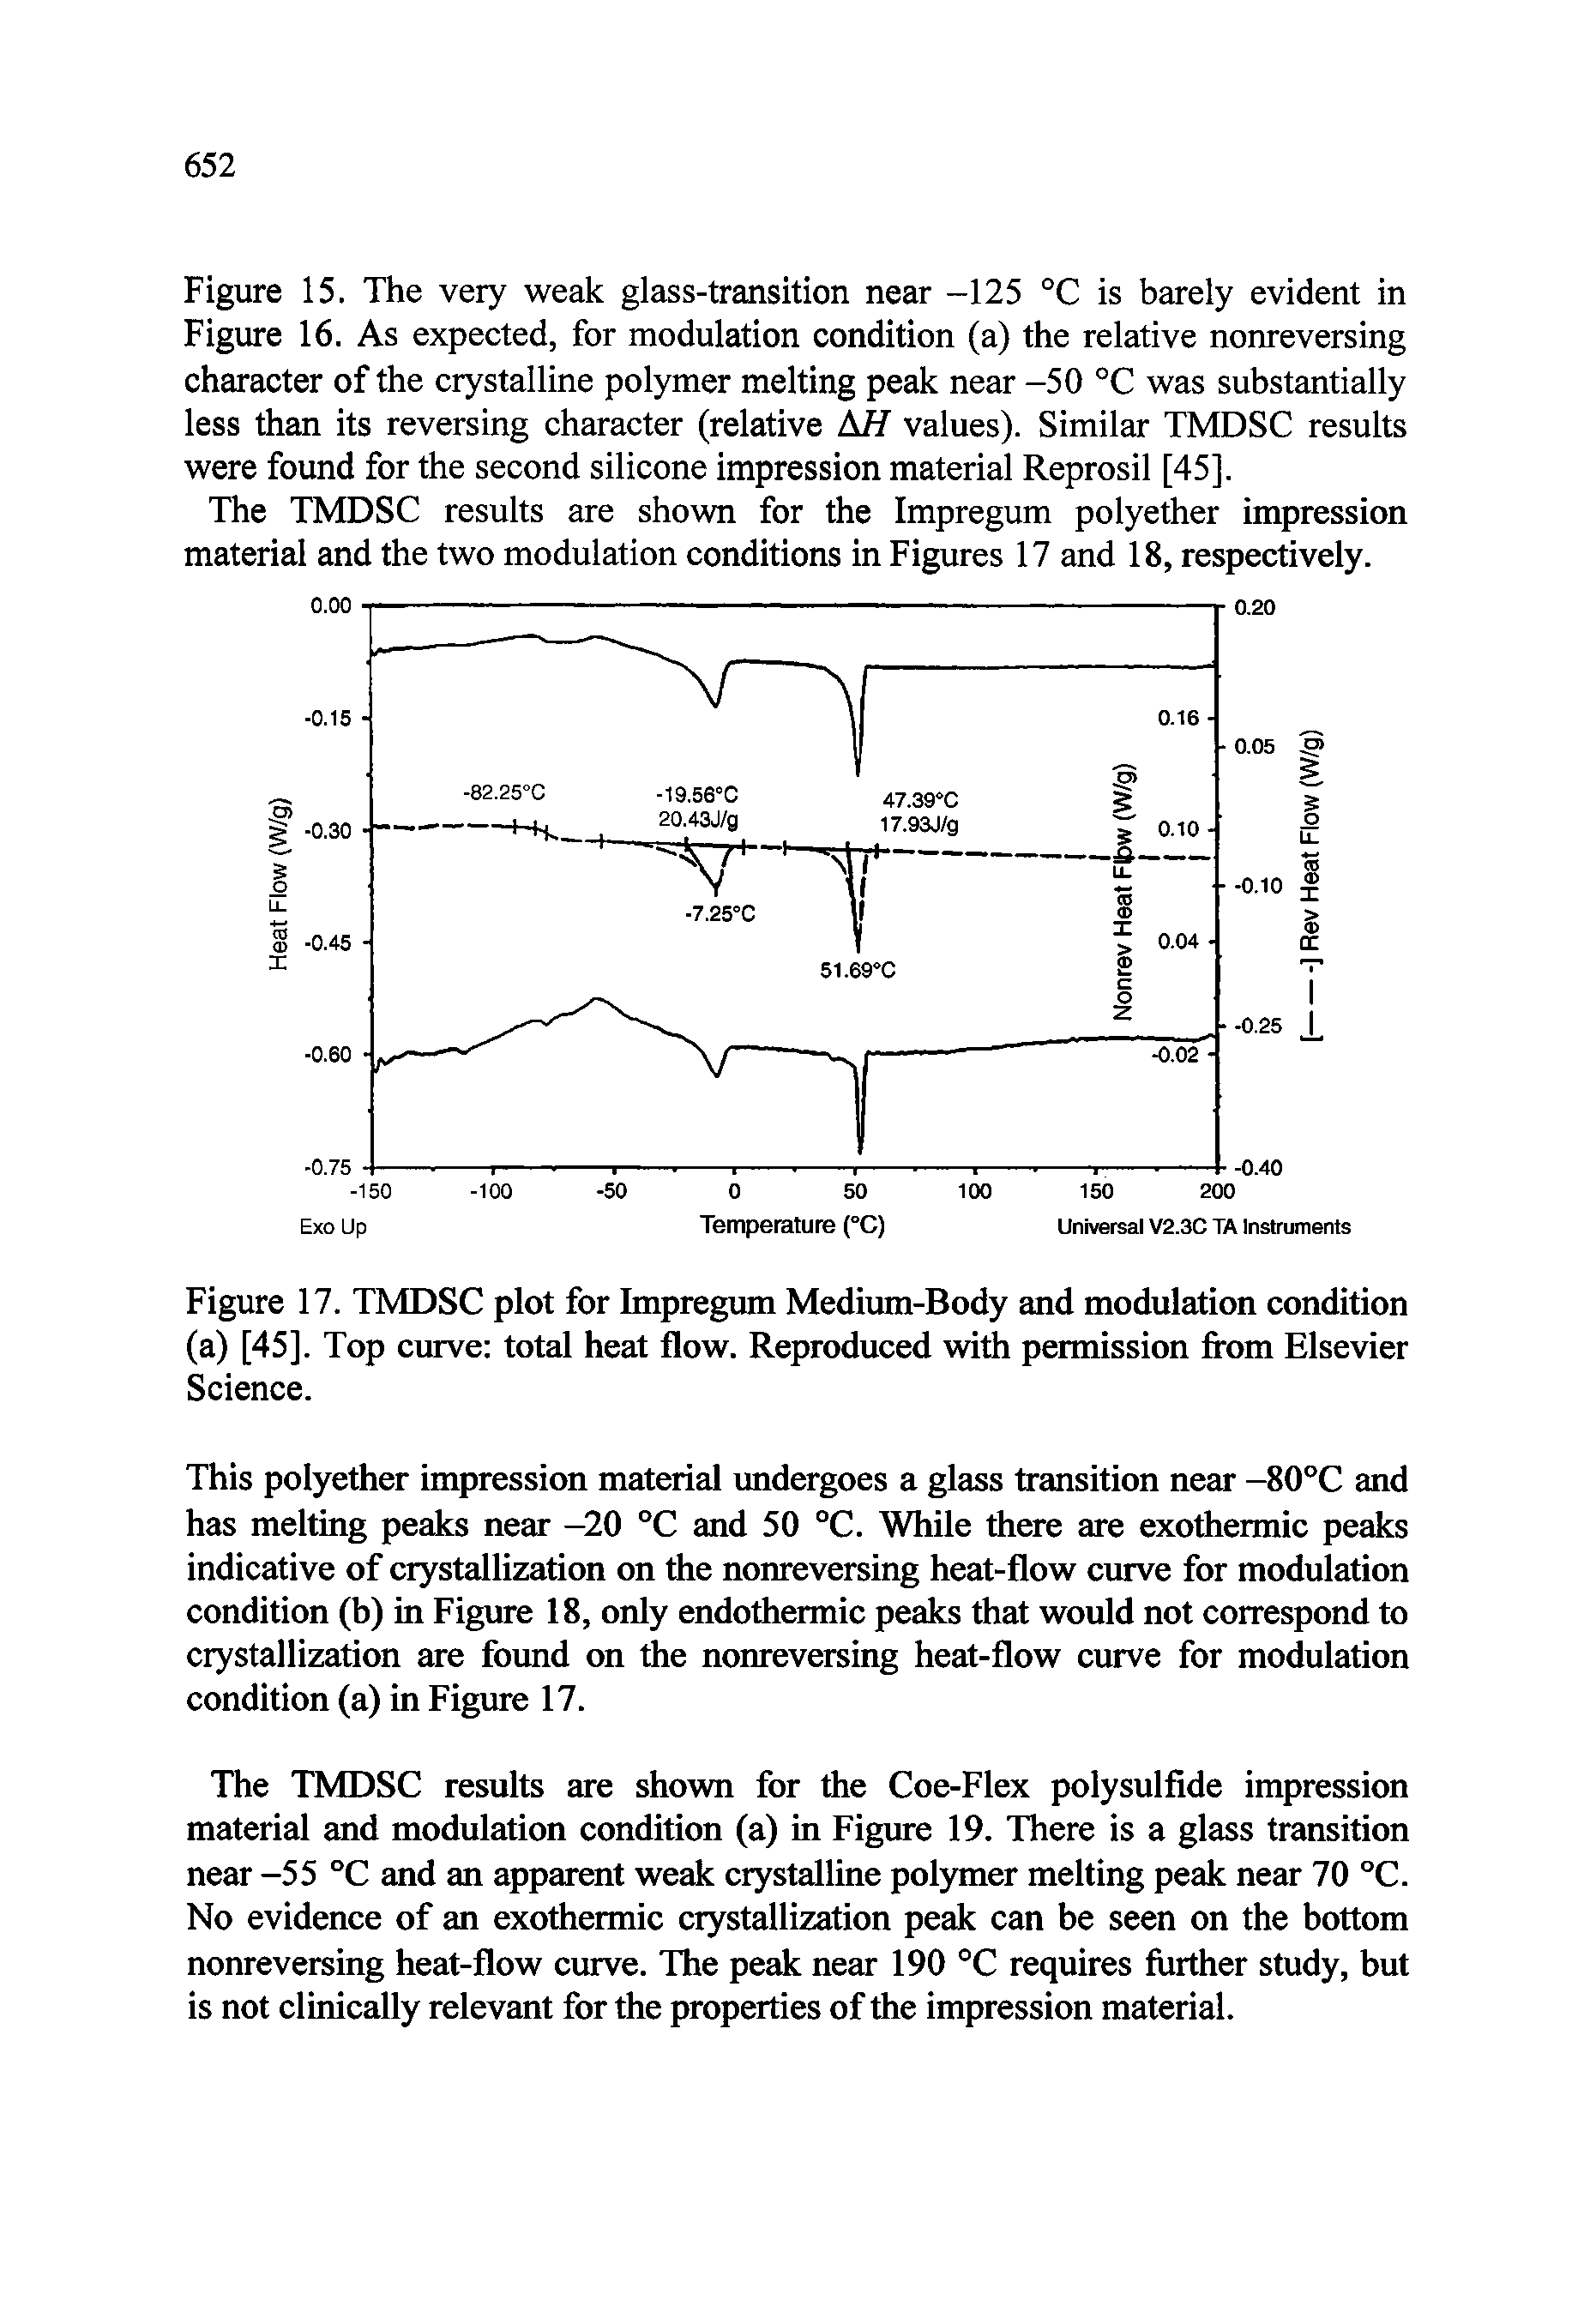 Figure 15. The very weak glass-transition near -125 °C is barely evident in Figure 16. As expected, for modulation condition (a) the relative nonreversing character of the crystalline polymer melting peak near -50 °C was substantially less than its reversing character (relative values). Similar TMDSC results were found for the second silicone impression material Reprosil [45].